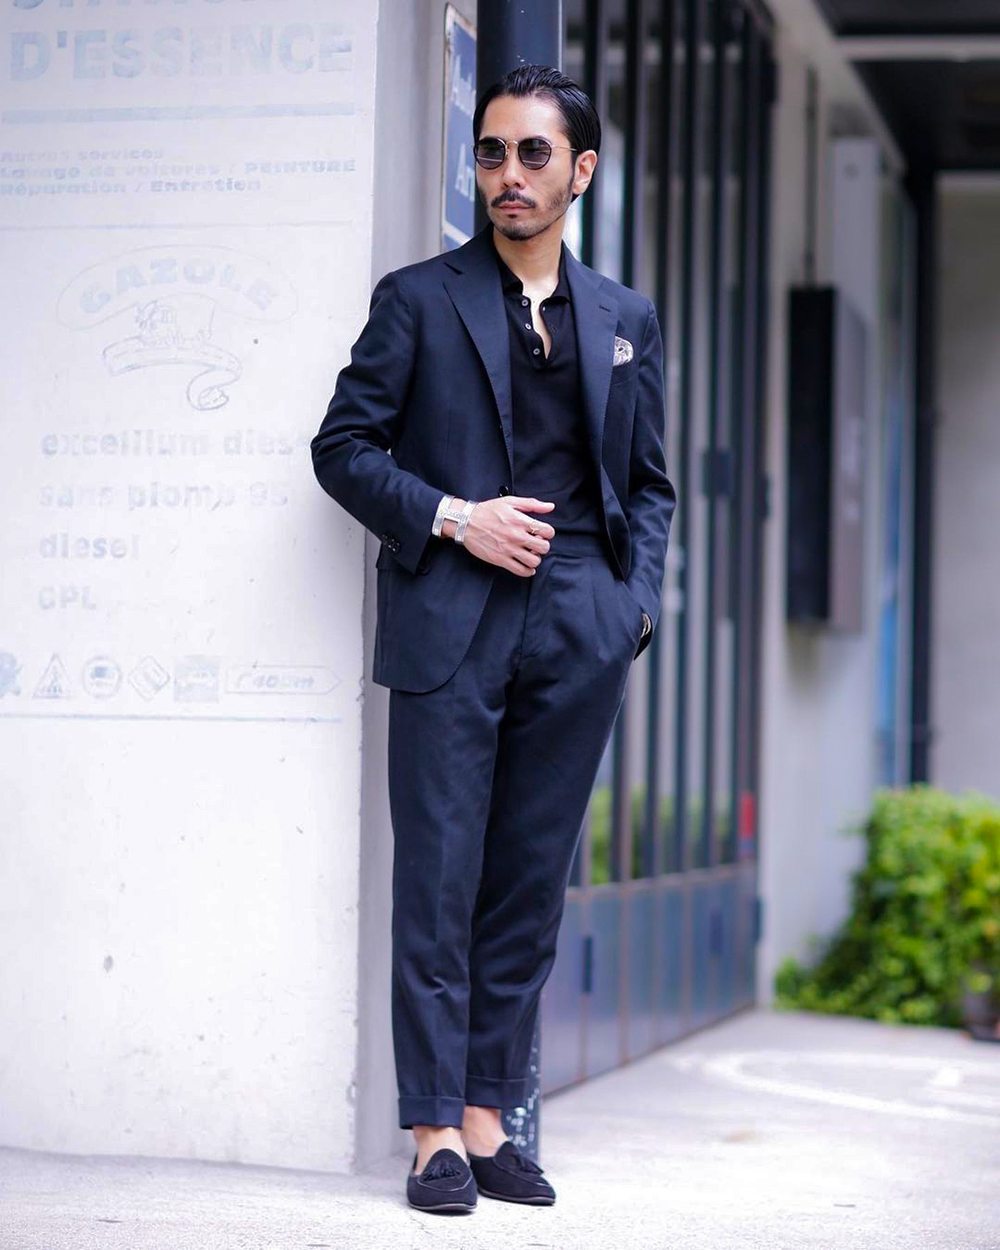 Wearing navy suit, black polo, and tassel loafers